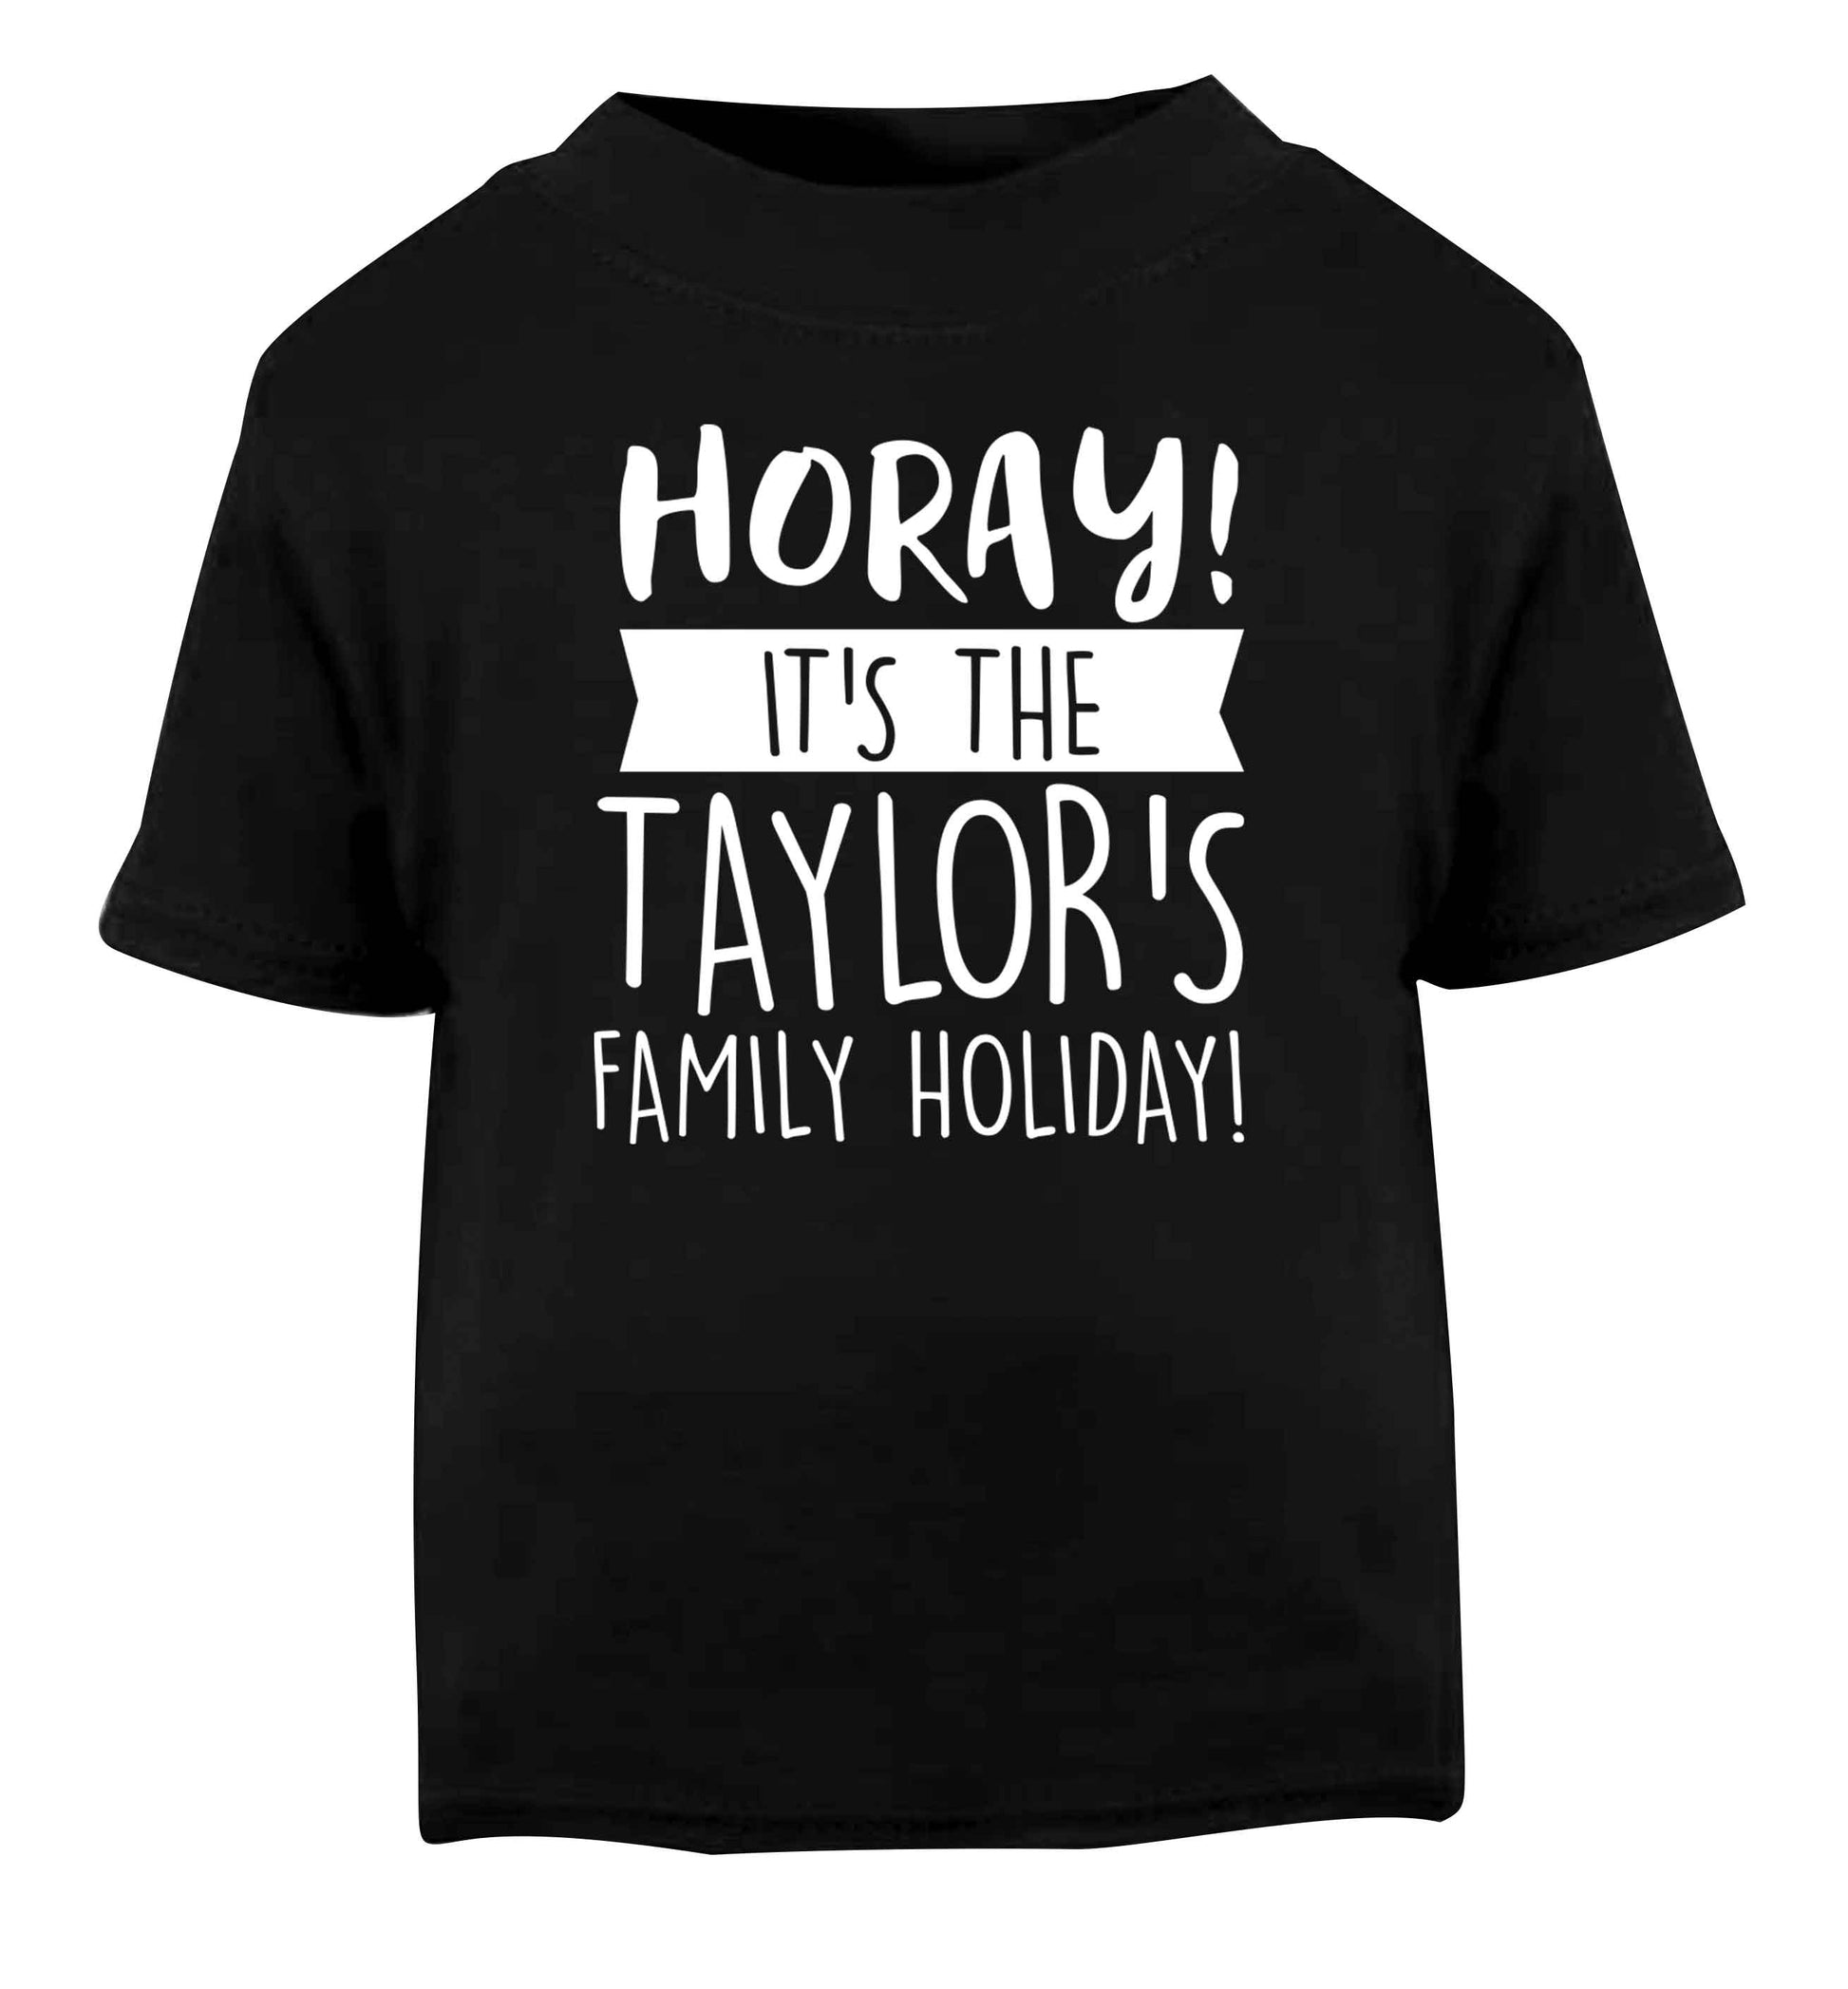 Horay it's the Taylor's family holiday! personalised item Black Baby Toddler Tshirt 2 years